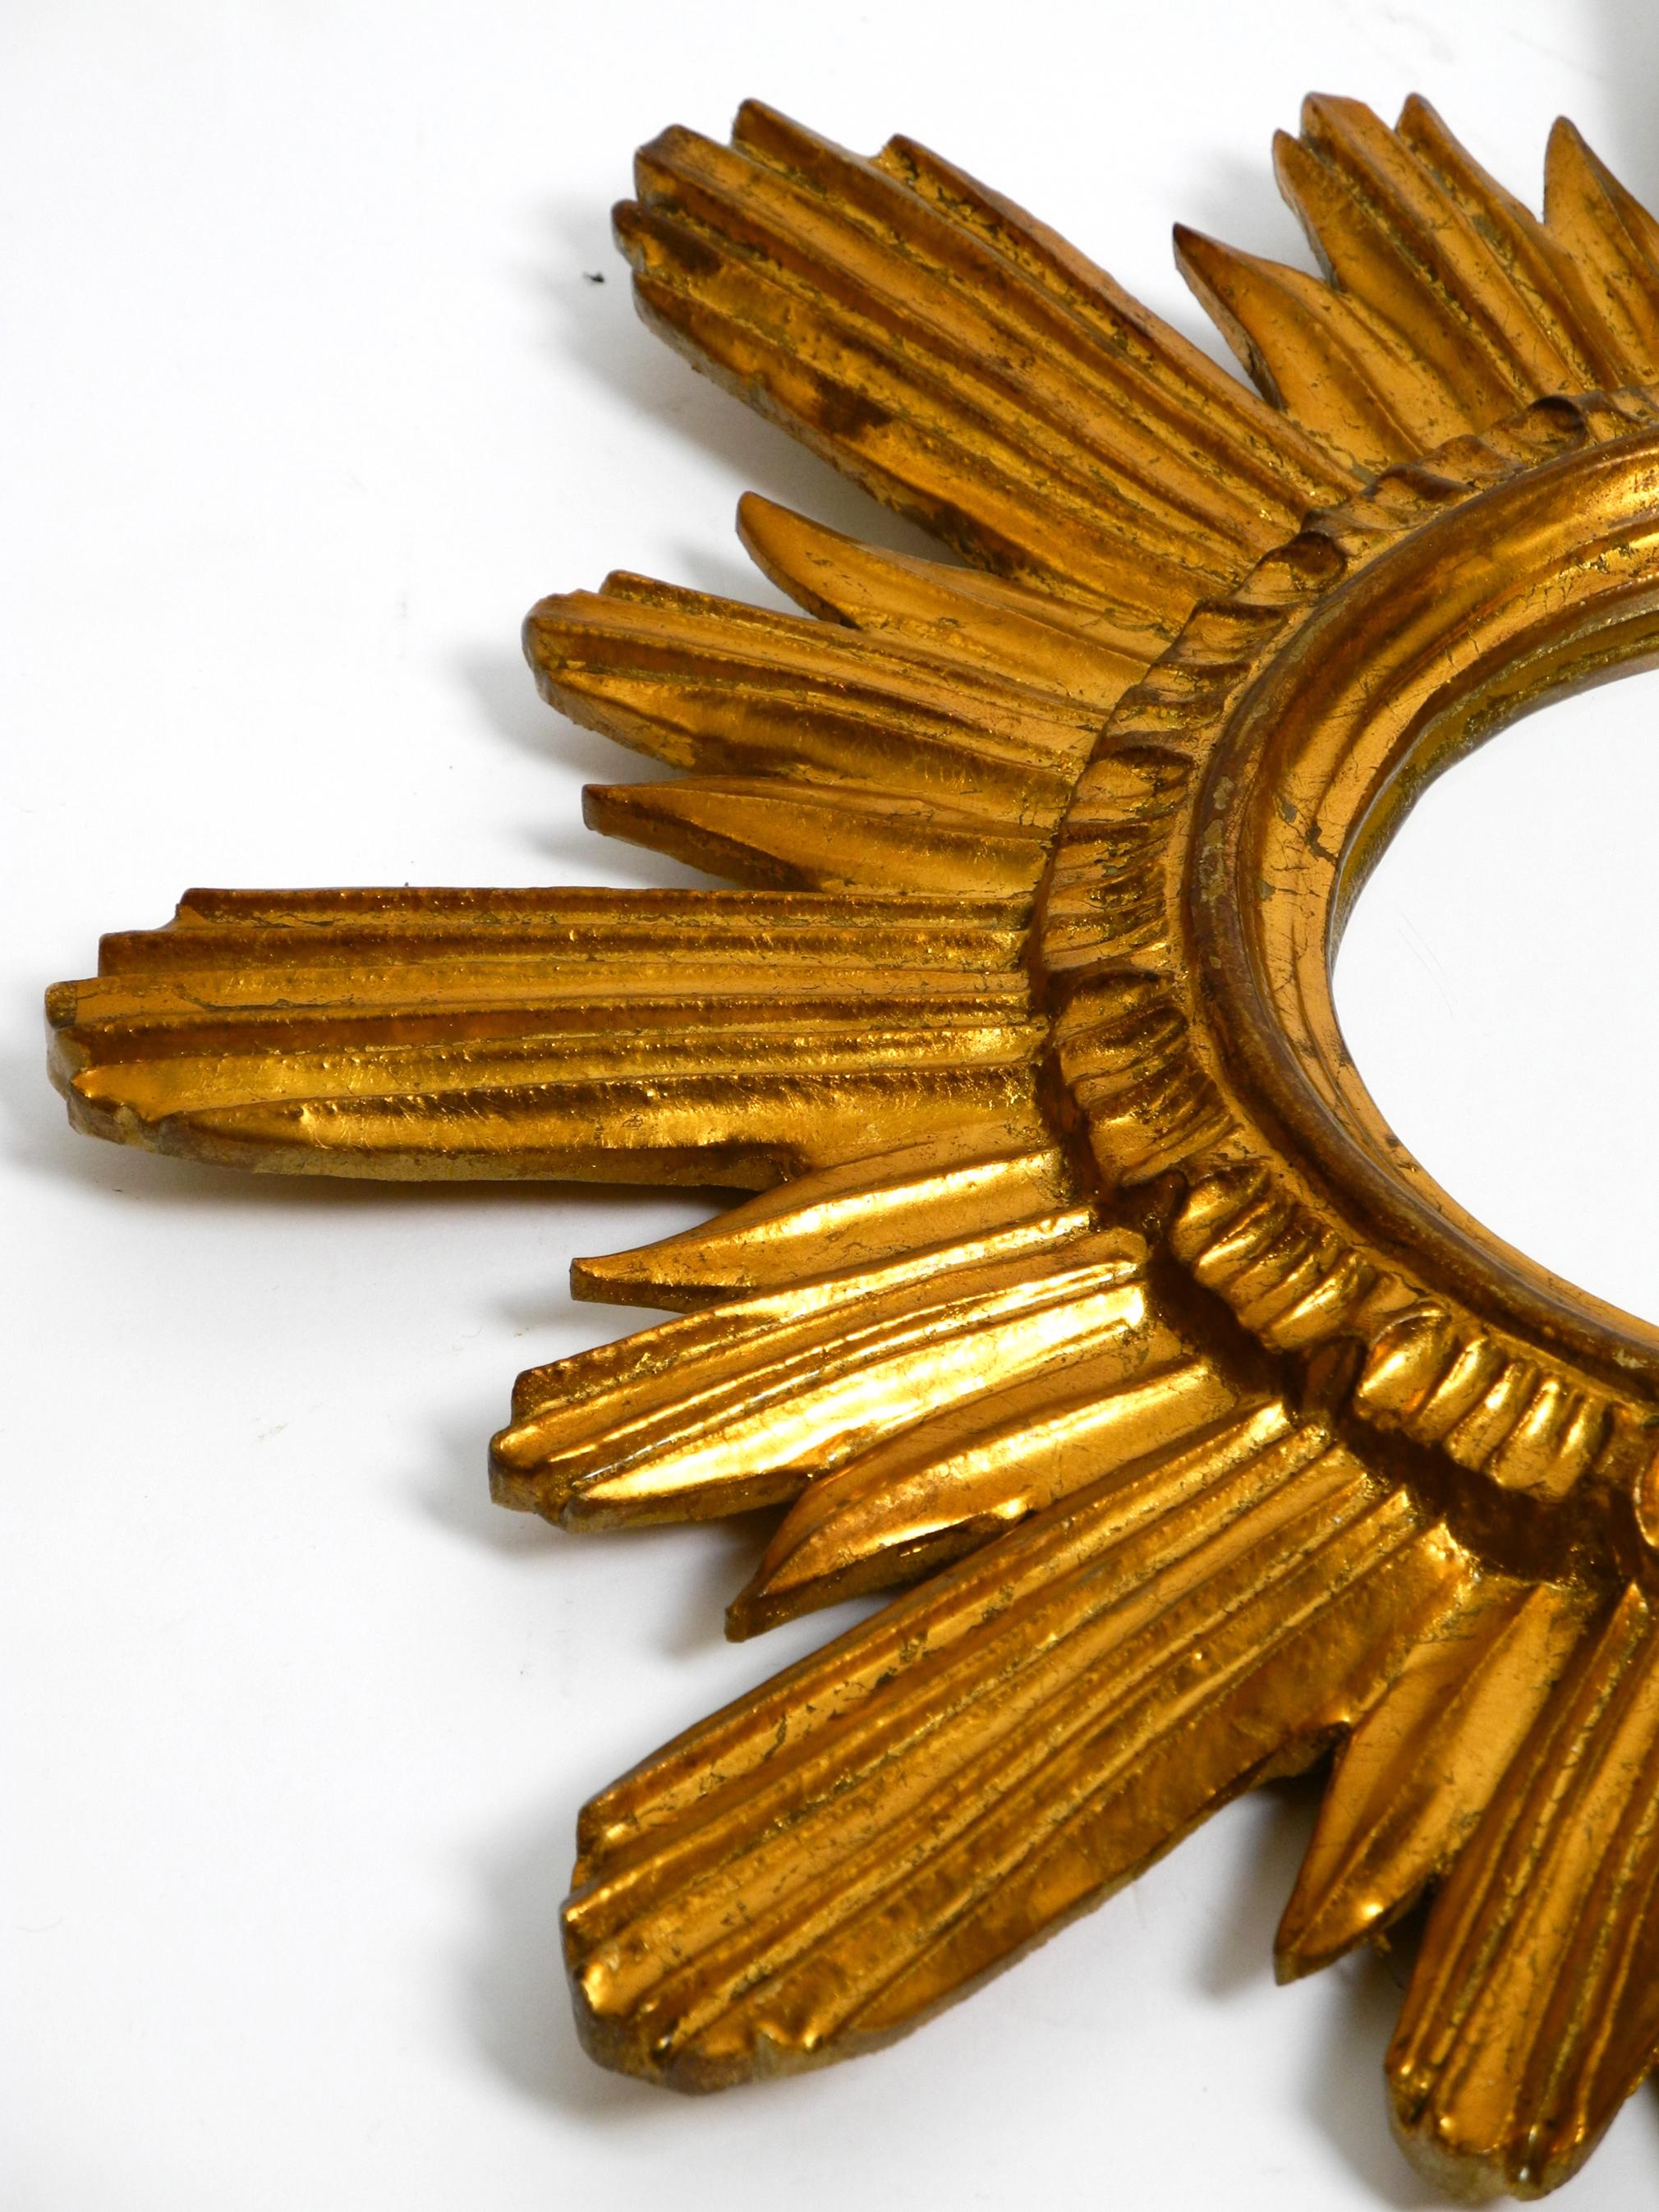 Pair of gold-plated mid-century sunburst wall mirrors made of wood and resin 8